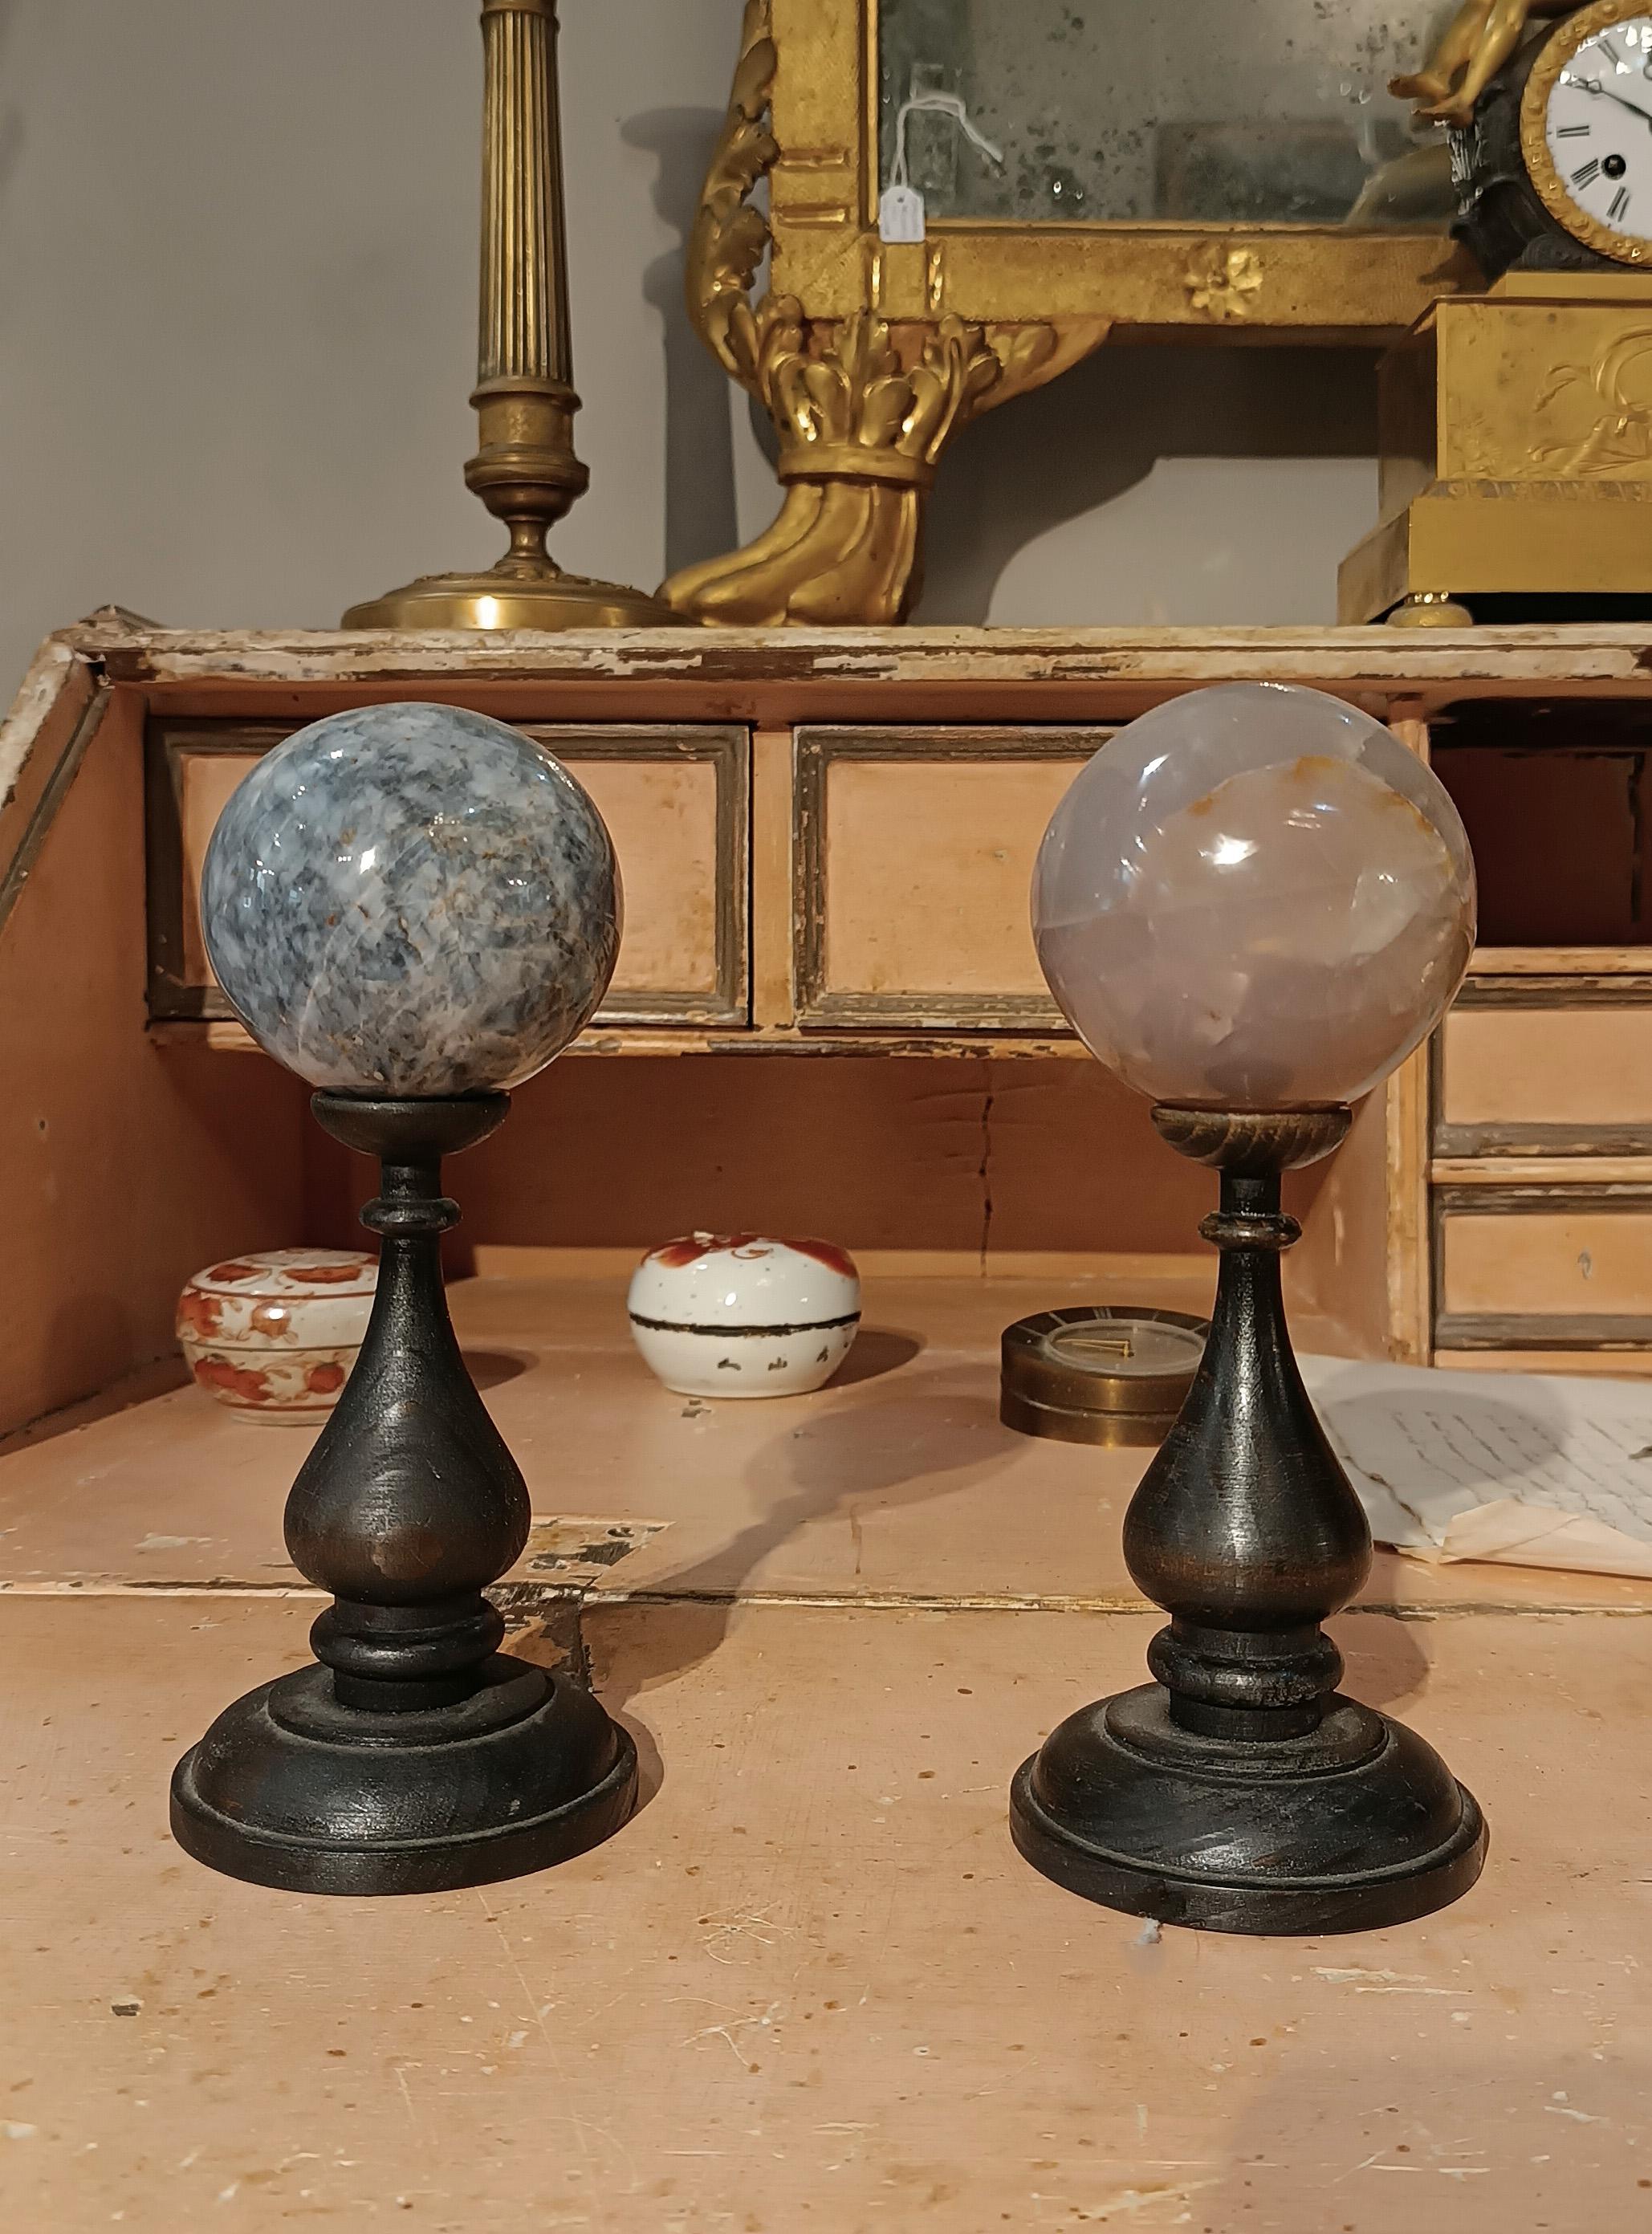 Delightful pair of quartz spheres, embellished with turned and ebonized wooden risers. The quartz spheres are in perfect condition, crystal clear and without imperfections. These small objects can add a touch of class and sophistication to any